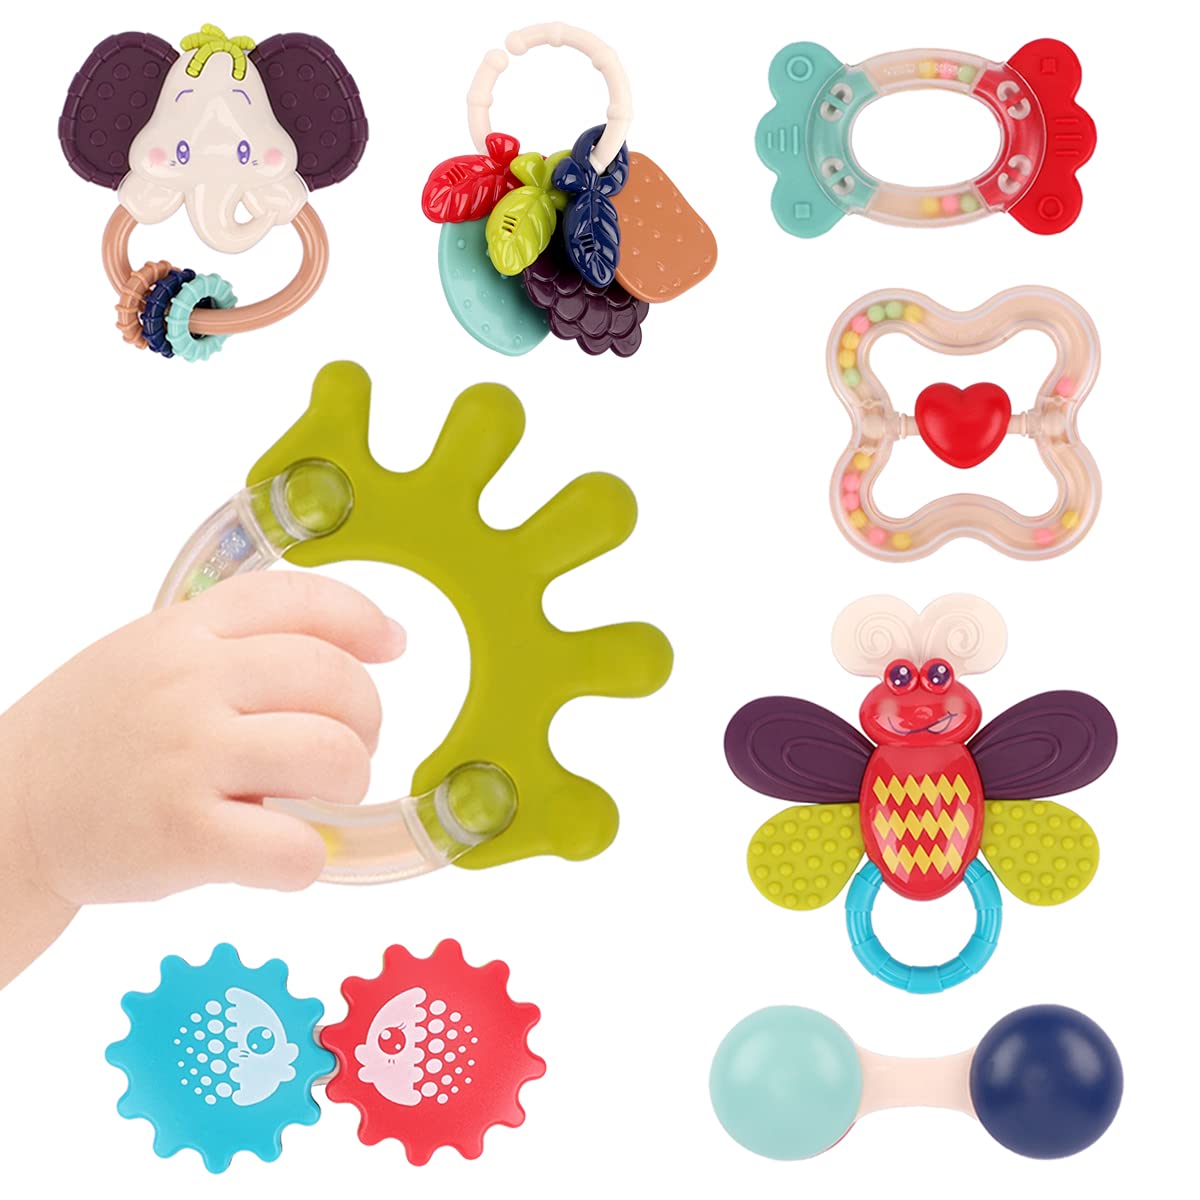 Baby Rattle Teether Toy Silicone Handbell Infant Teething Ring Shaking Bell Gift 